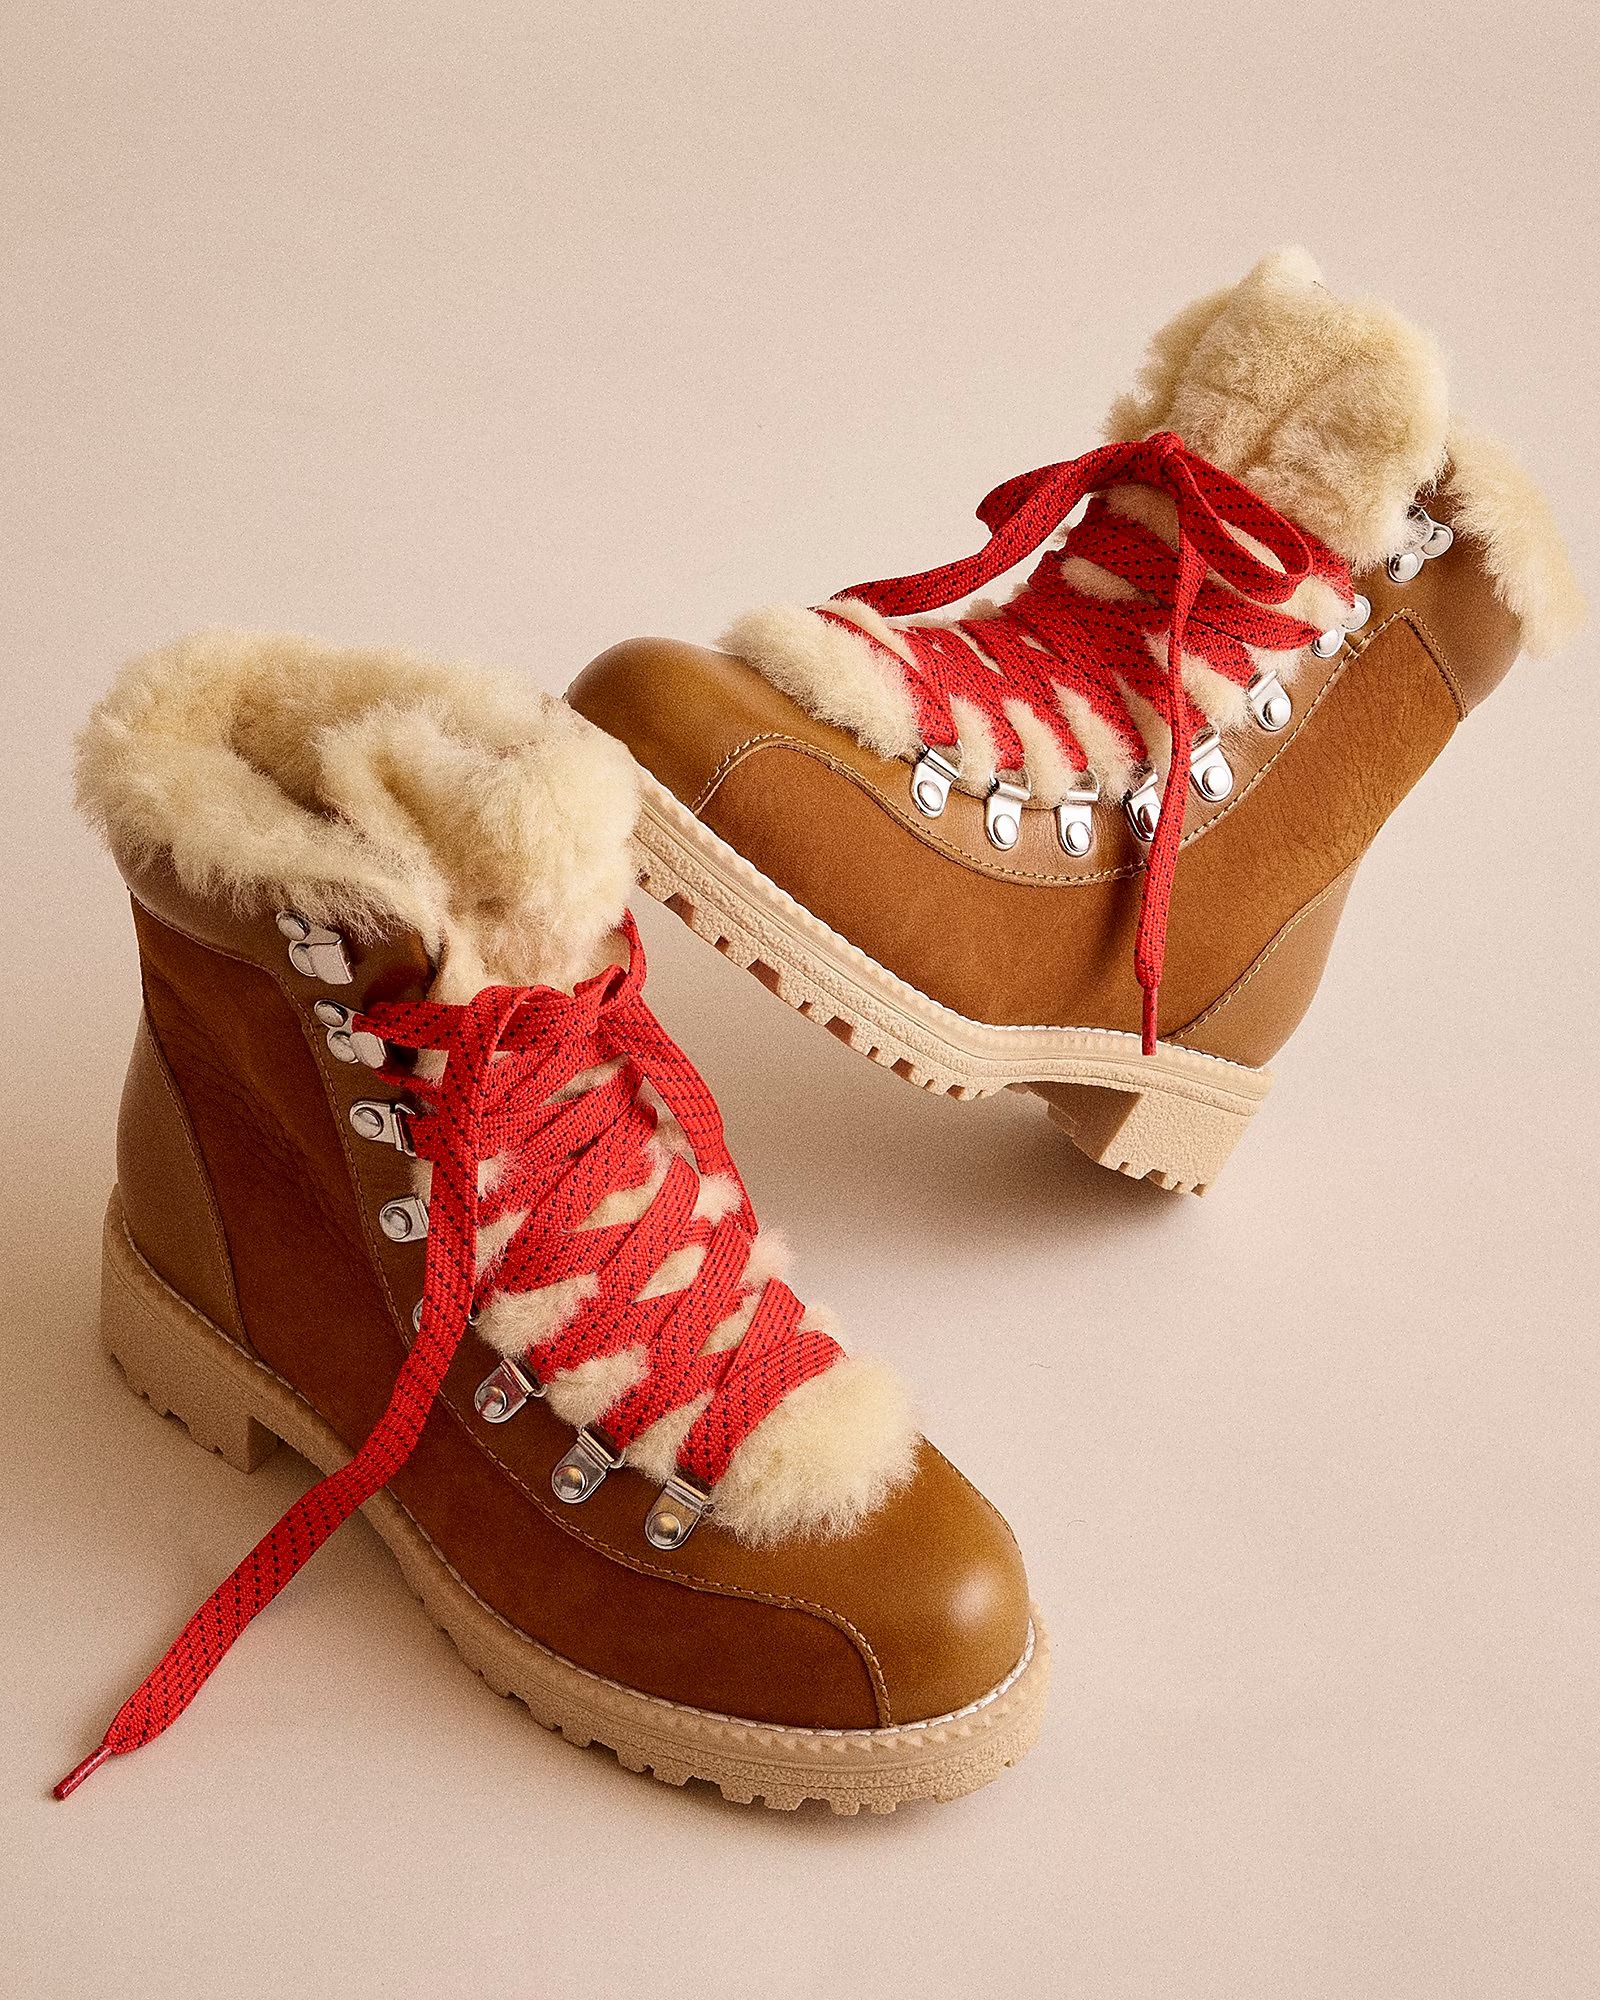 New Nordic boots in leather and nubuck | J.Crew US